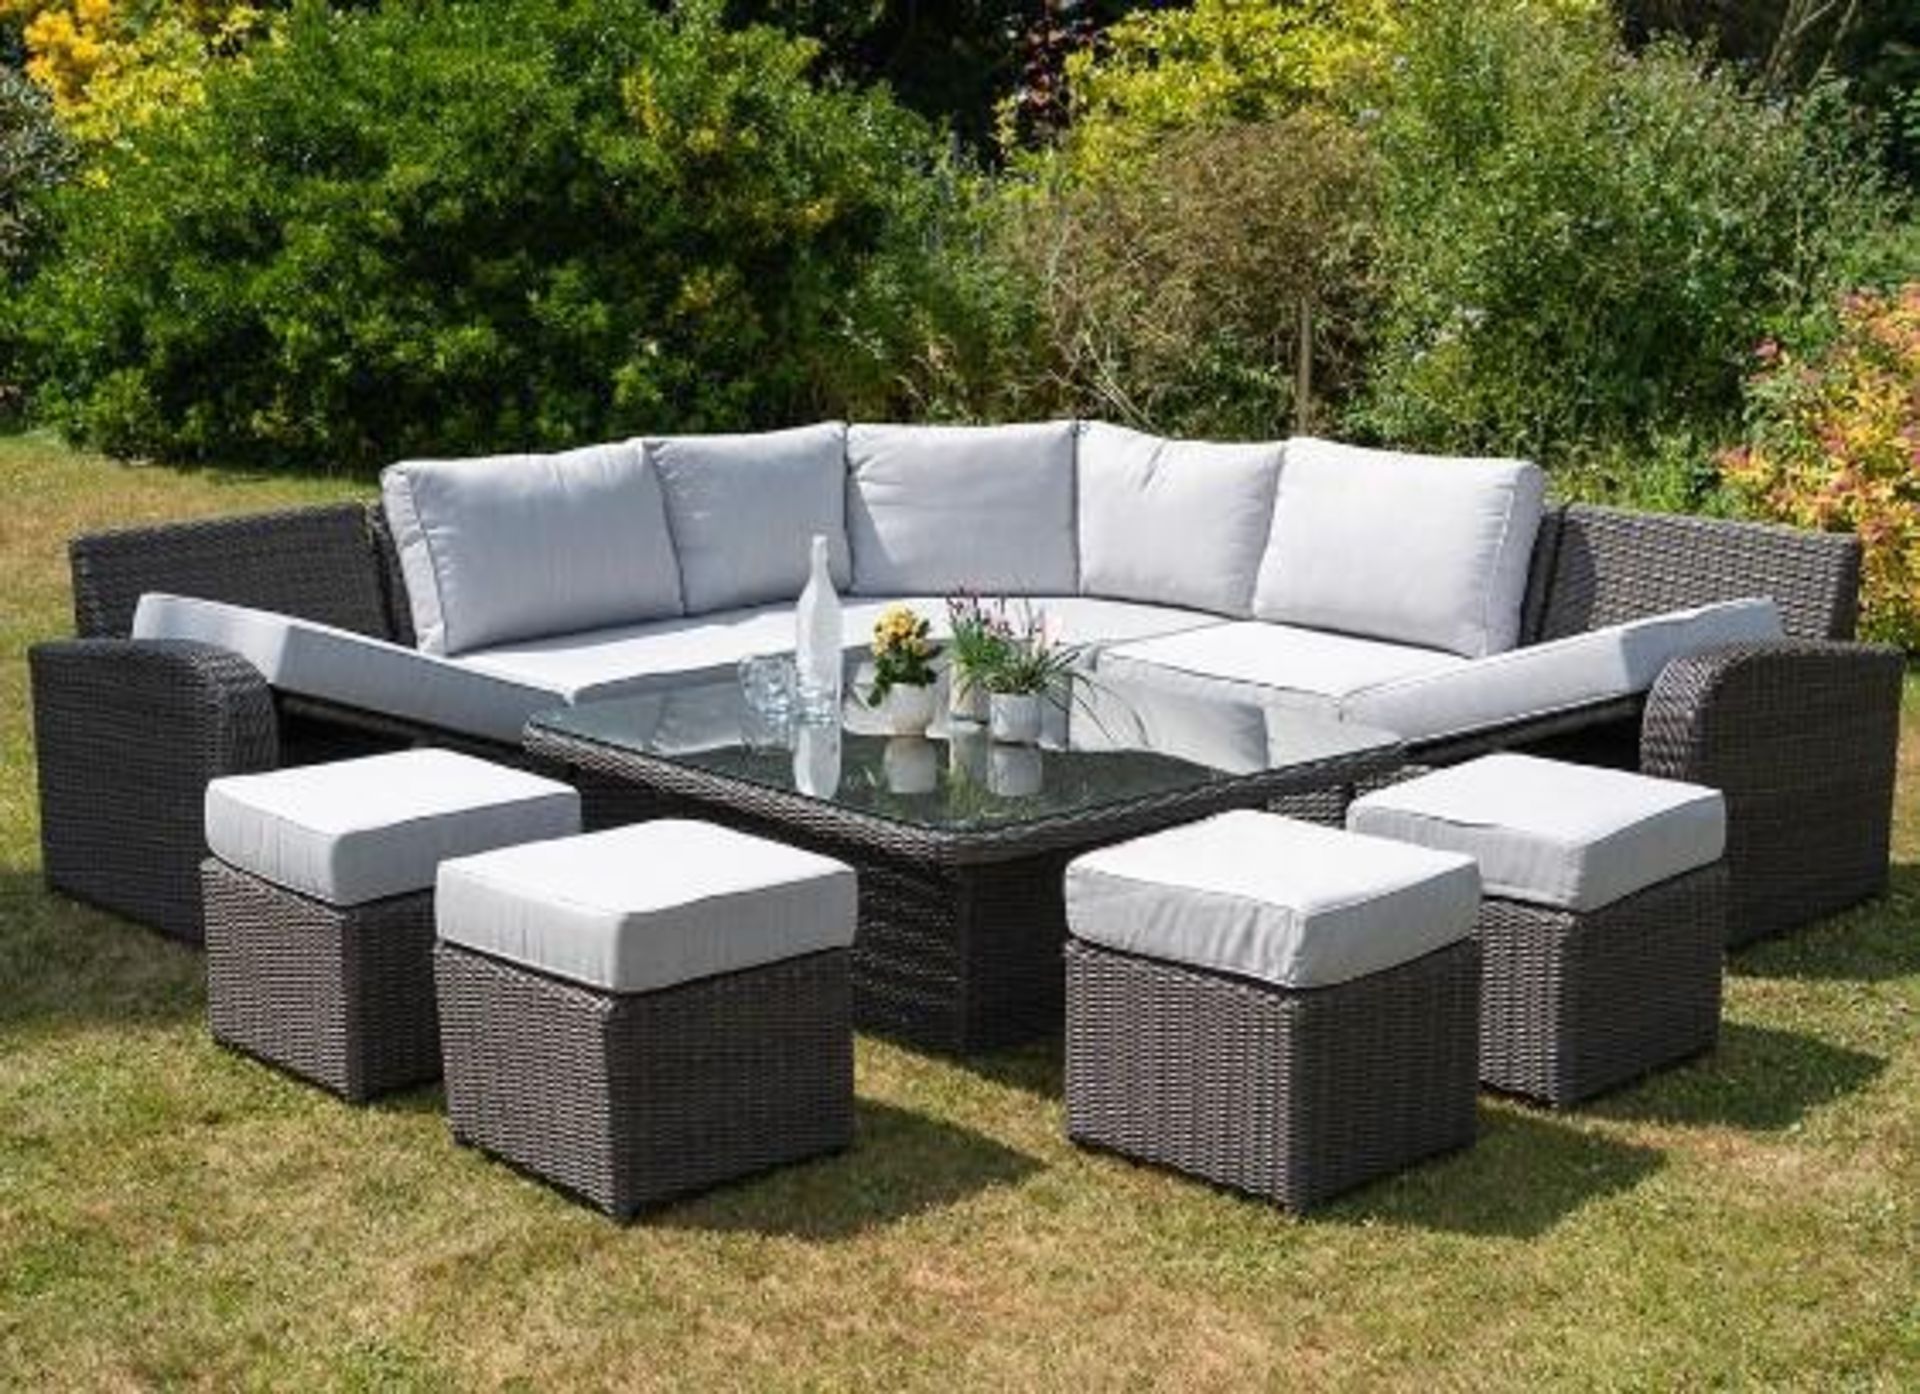 Brand New Moda Furniture, 10 Seater Outdoor Rise and Fall Table Dining Set in Natural with Cream - Image 2 of 6